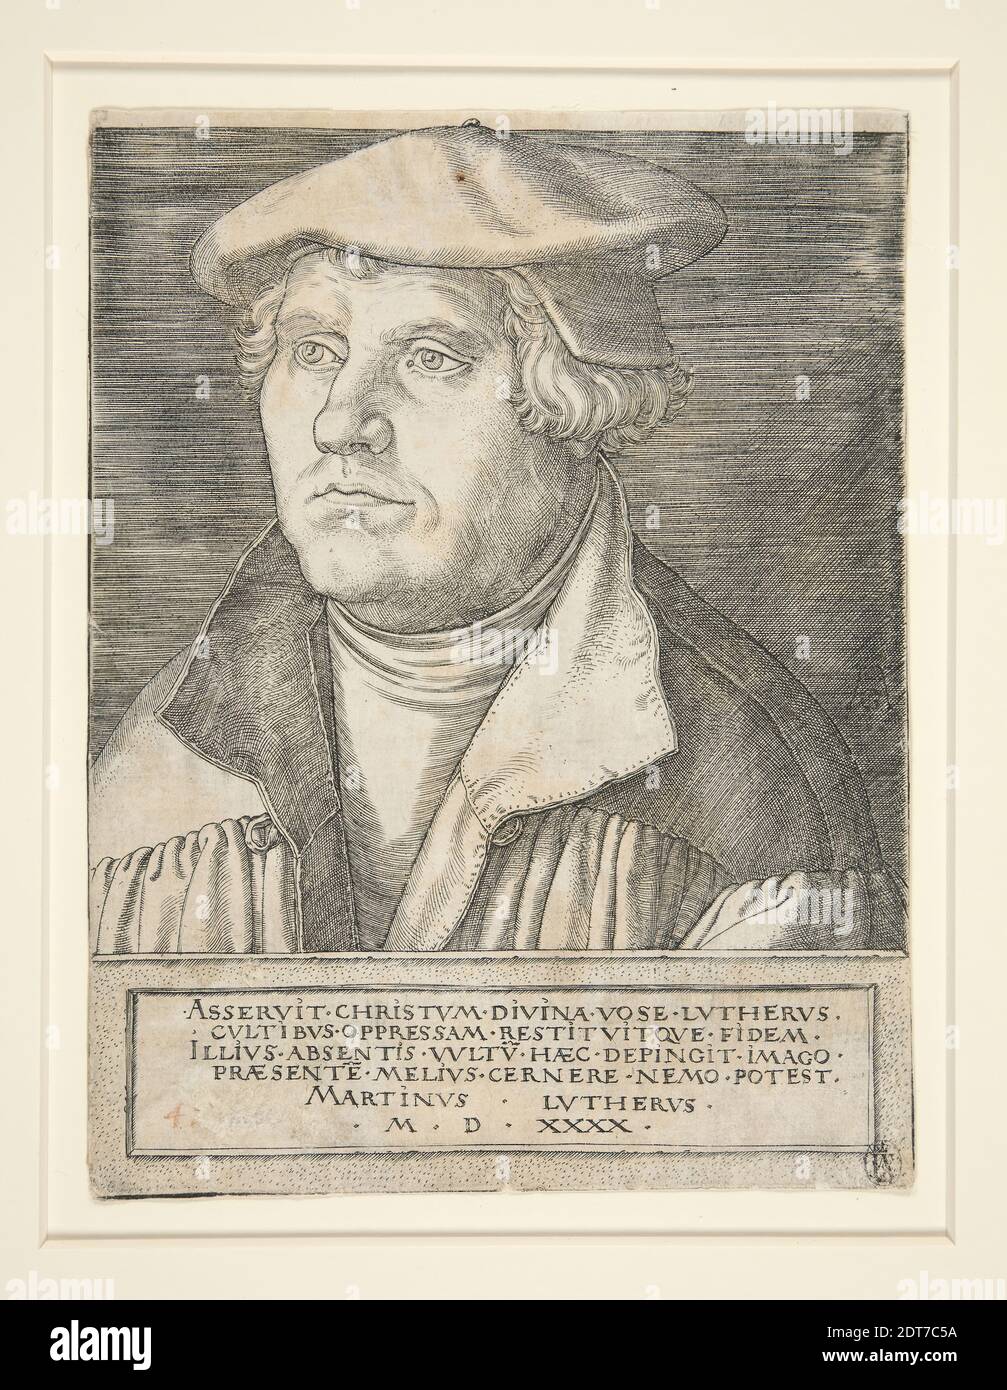 Artist: Heinrich Aldegrever, Germany, 1502–1555/61, Martin Luther (1483-1546), Engraving, 16.7 × 12.7 cm (6 9/16 × 5 in.), Made in Germany, German, 16th century, Works on Paper - Prints Stock Photo